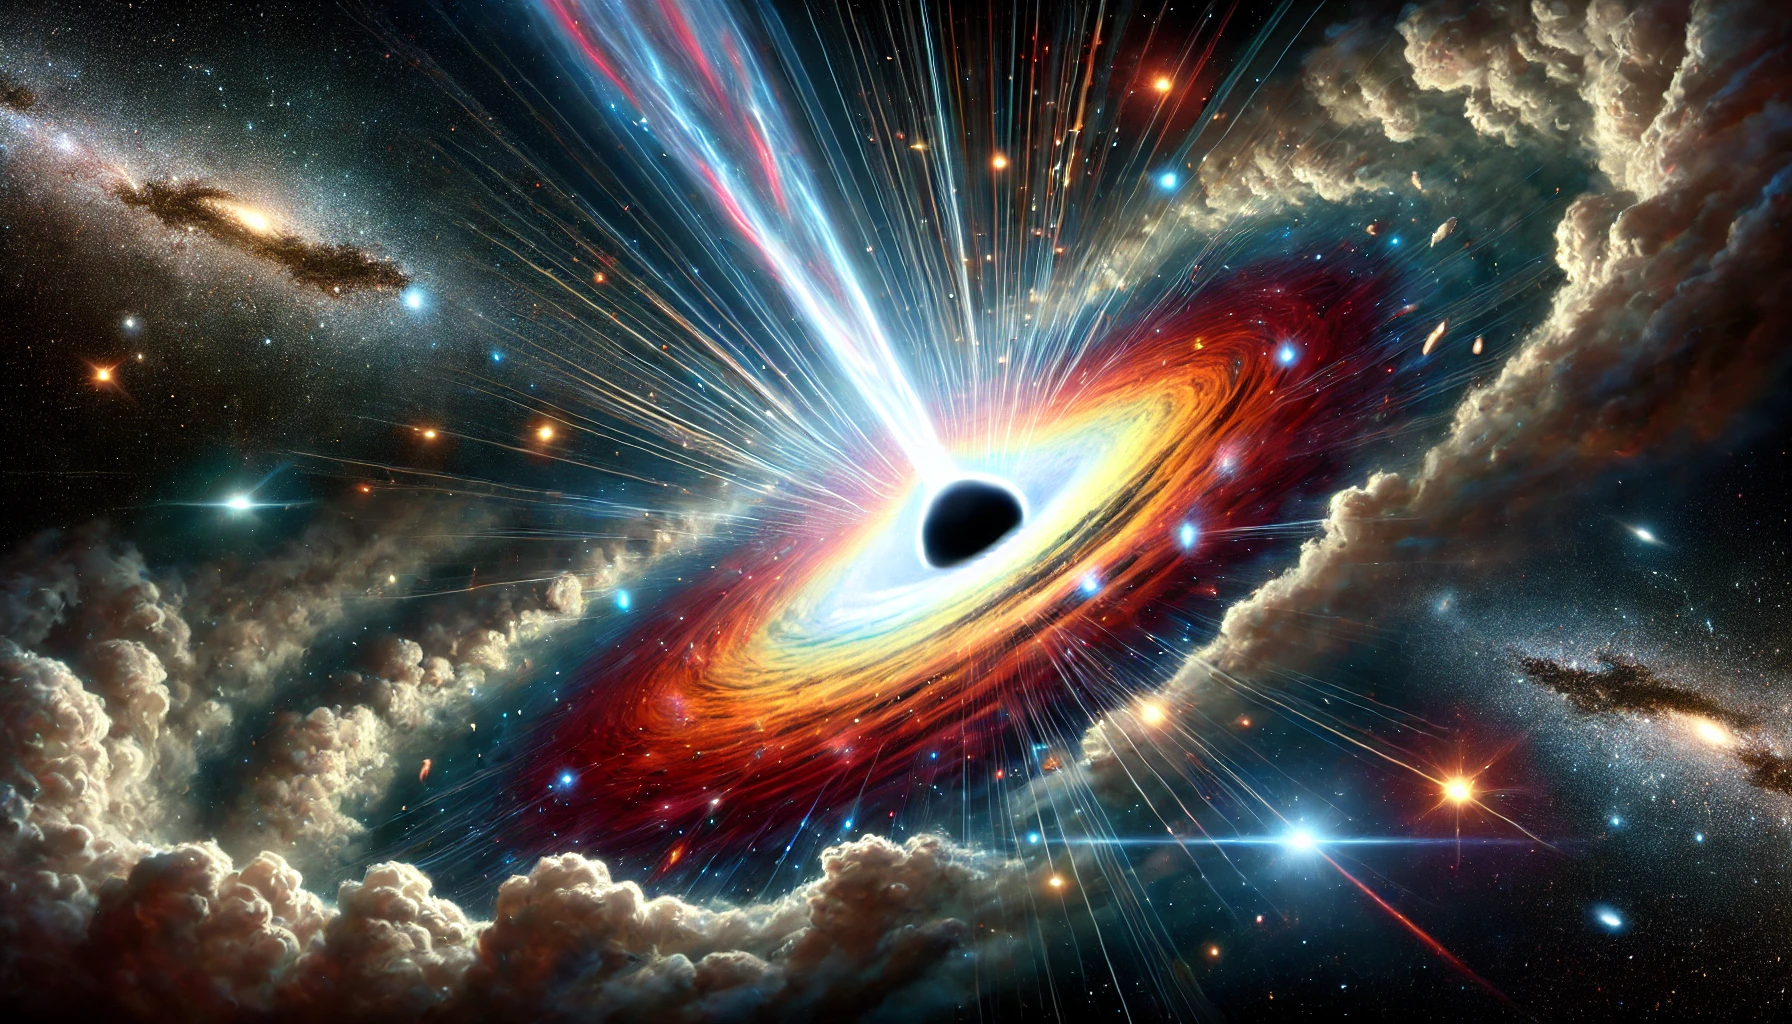 An-illustration-of-the-exhaust-side-of-a-black-hole-referred-to-as-the-white-hole-hypothesis.-The-central-feature-is-a-vortex-or-funnel-like-struct